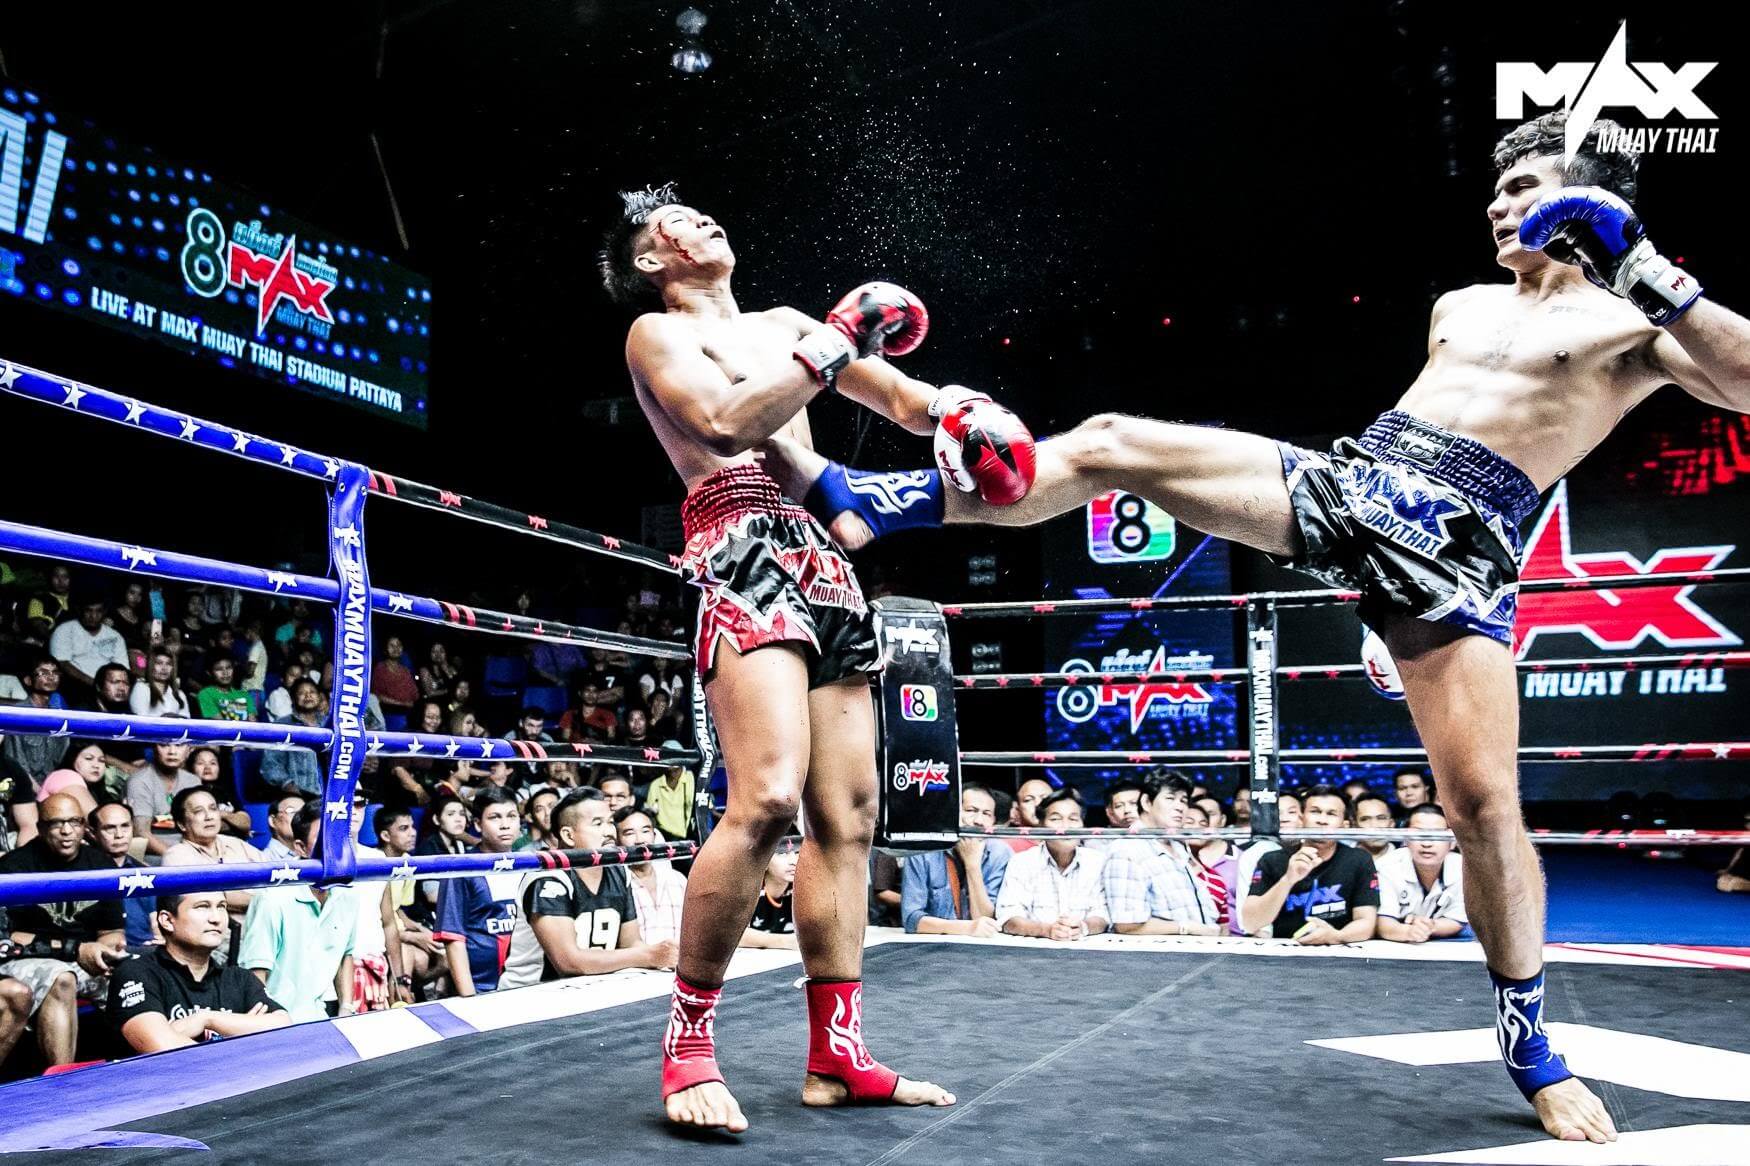 I was shocked to find out a Muay Thai official assaulted - Extreme ...